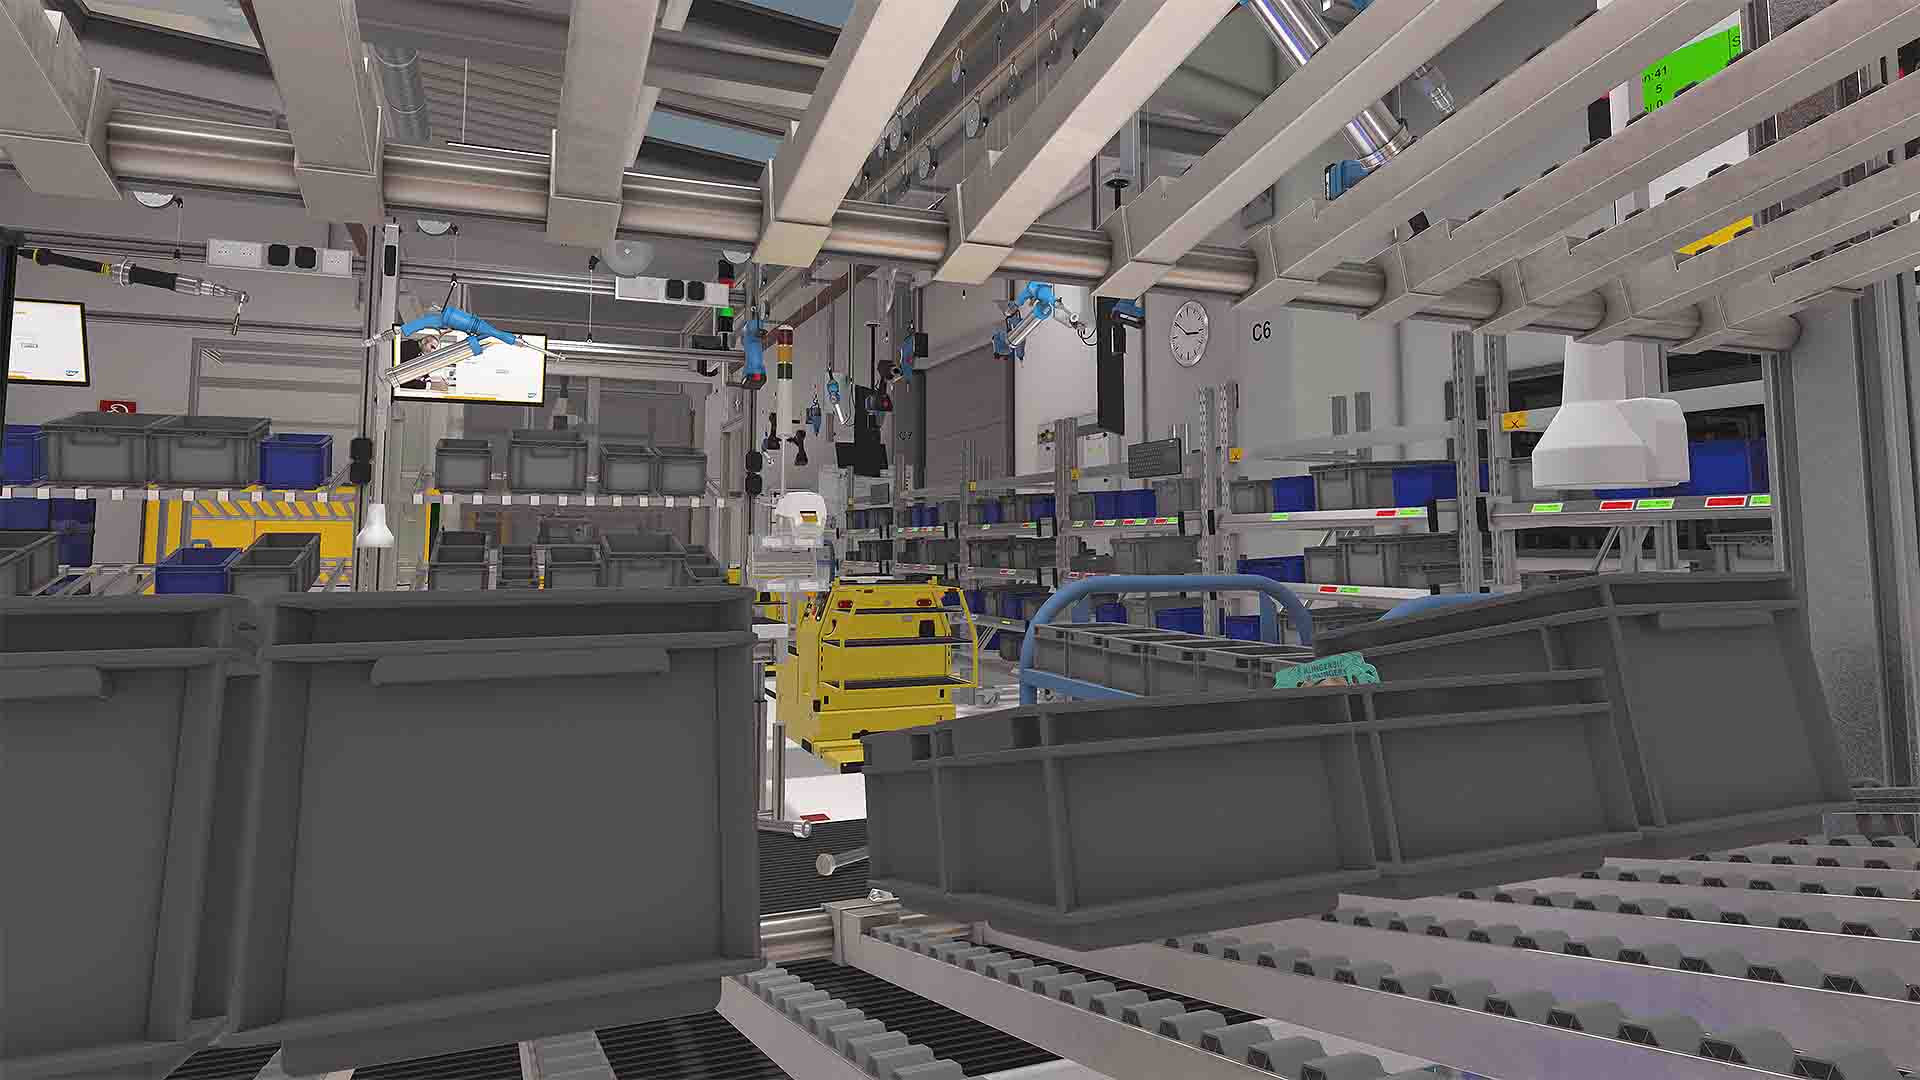 BRP-Rotax uses Virtual Reality to train their employees in an effective, low-cost and standardized manner.